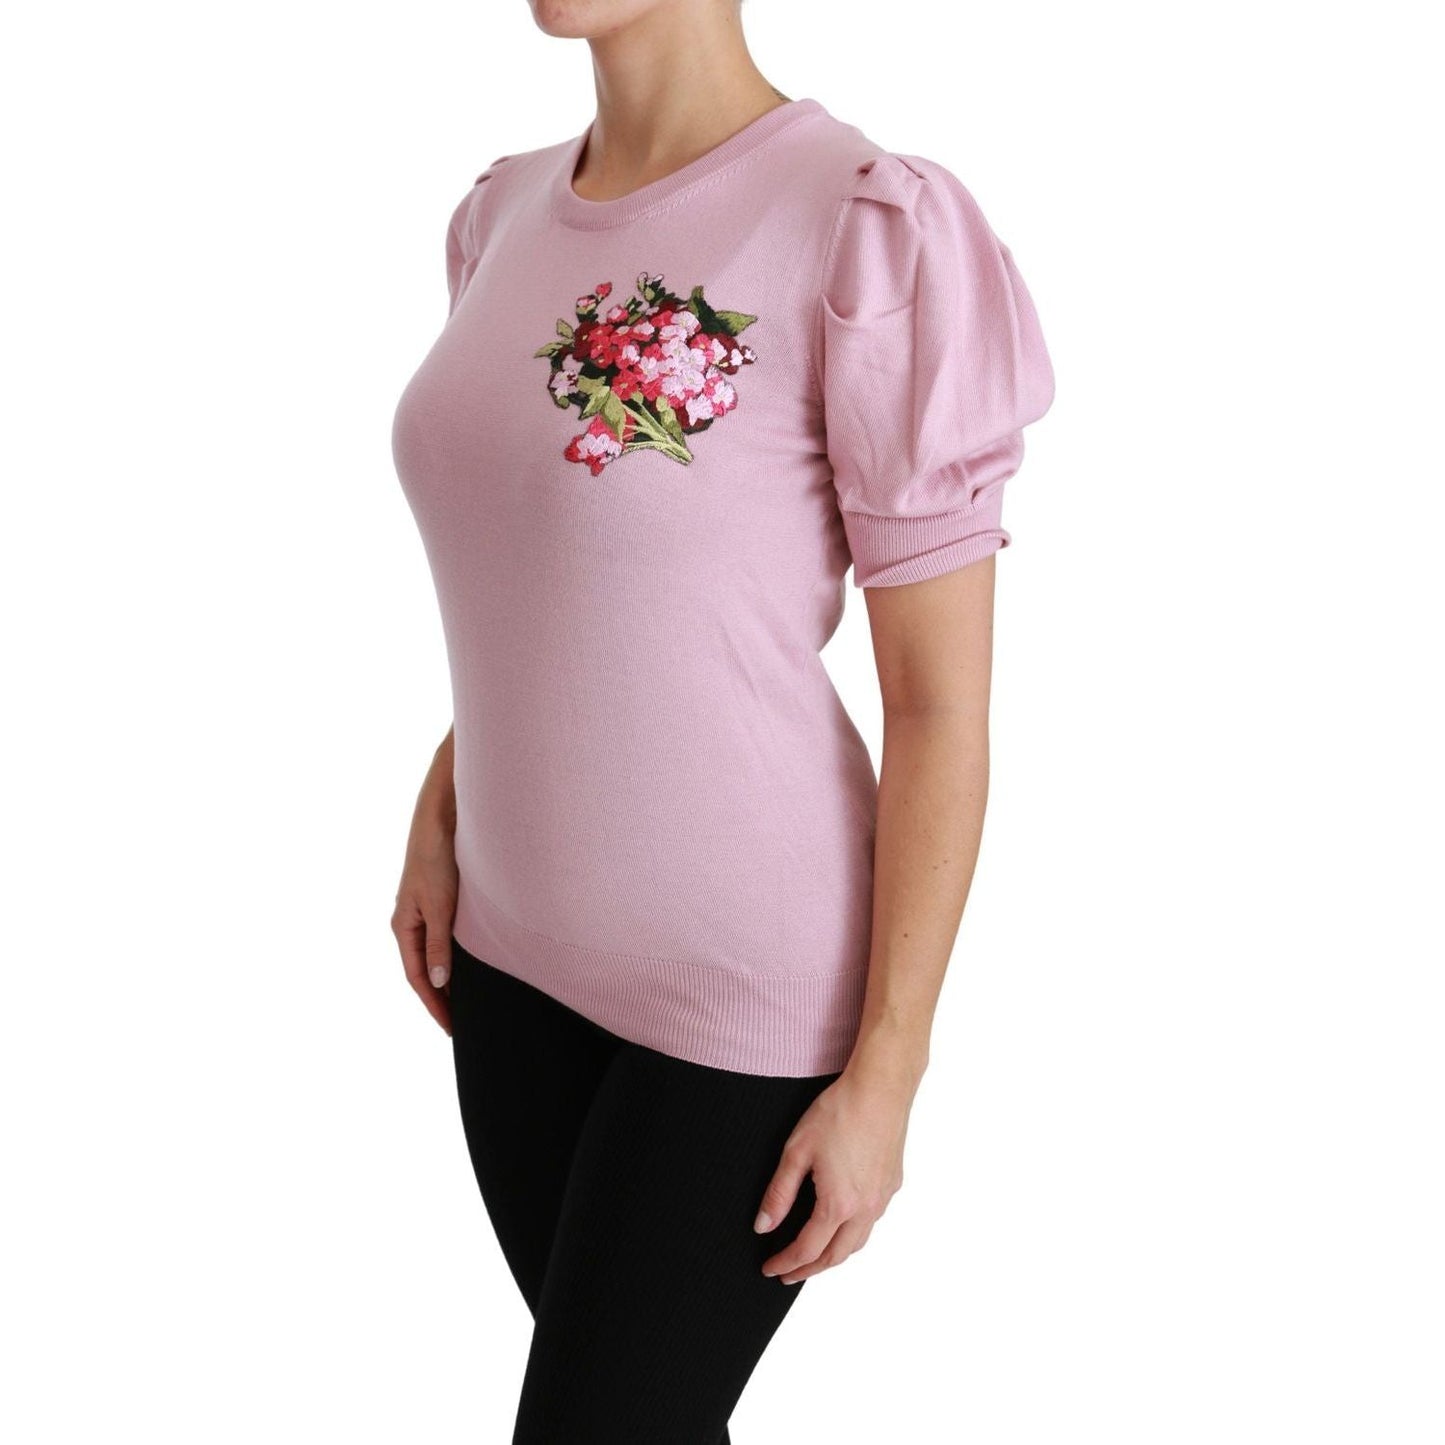 Dolce & Gabbana Elegant Embroidered Virgin Wool Blouse pink-floral-embroidered-blouse-wool-top